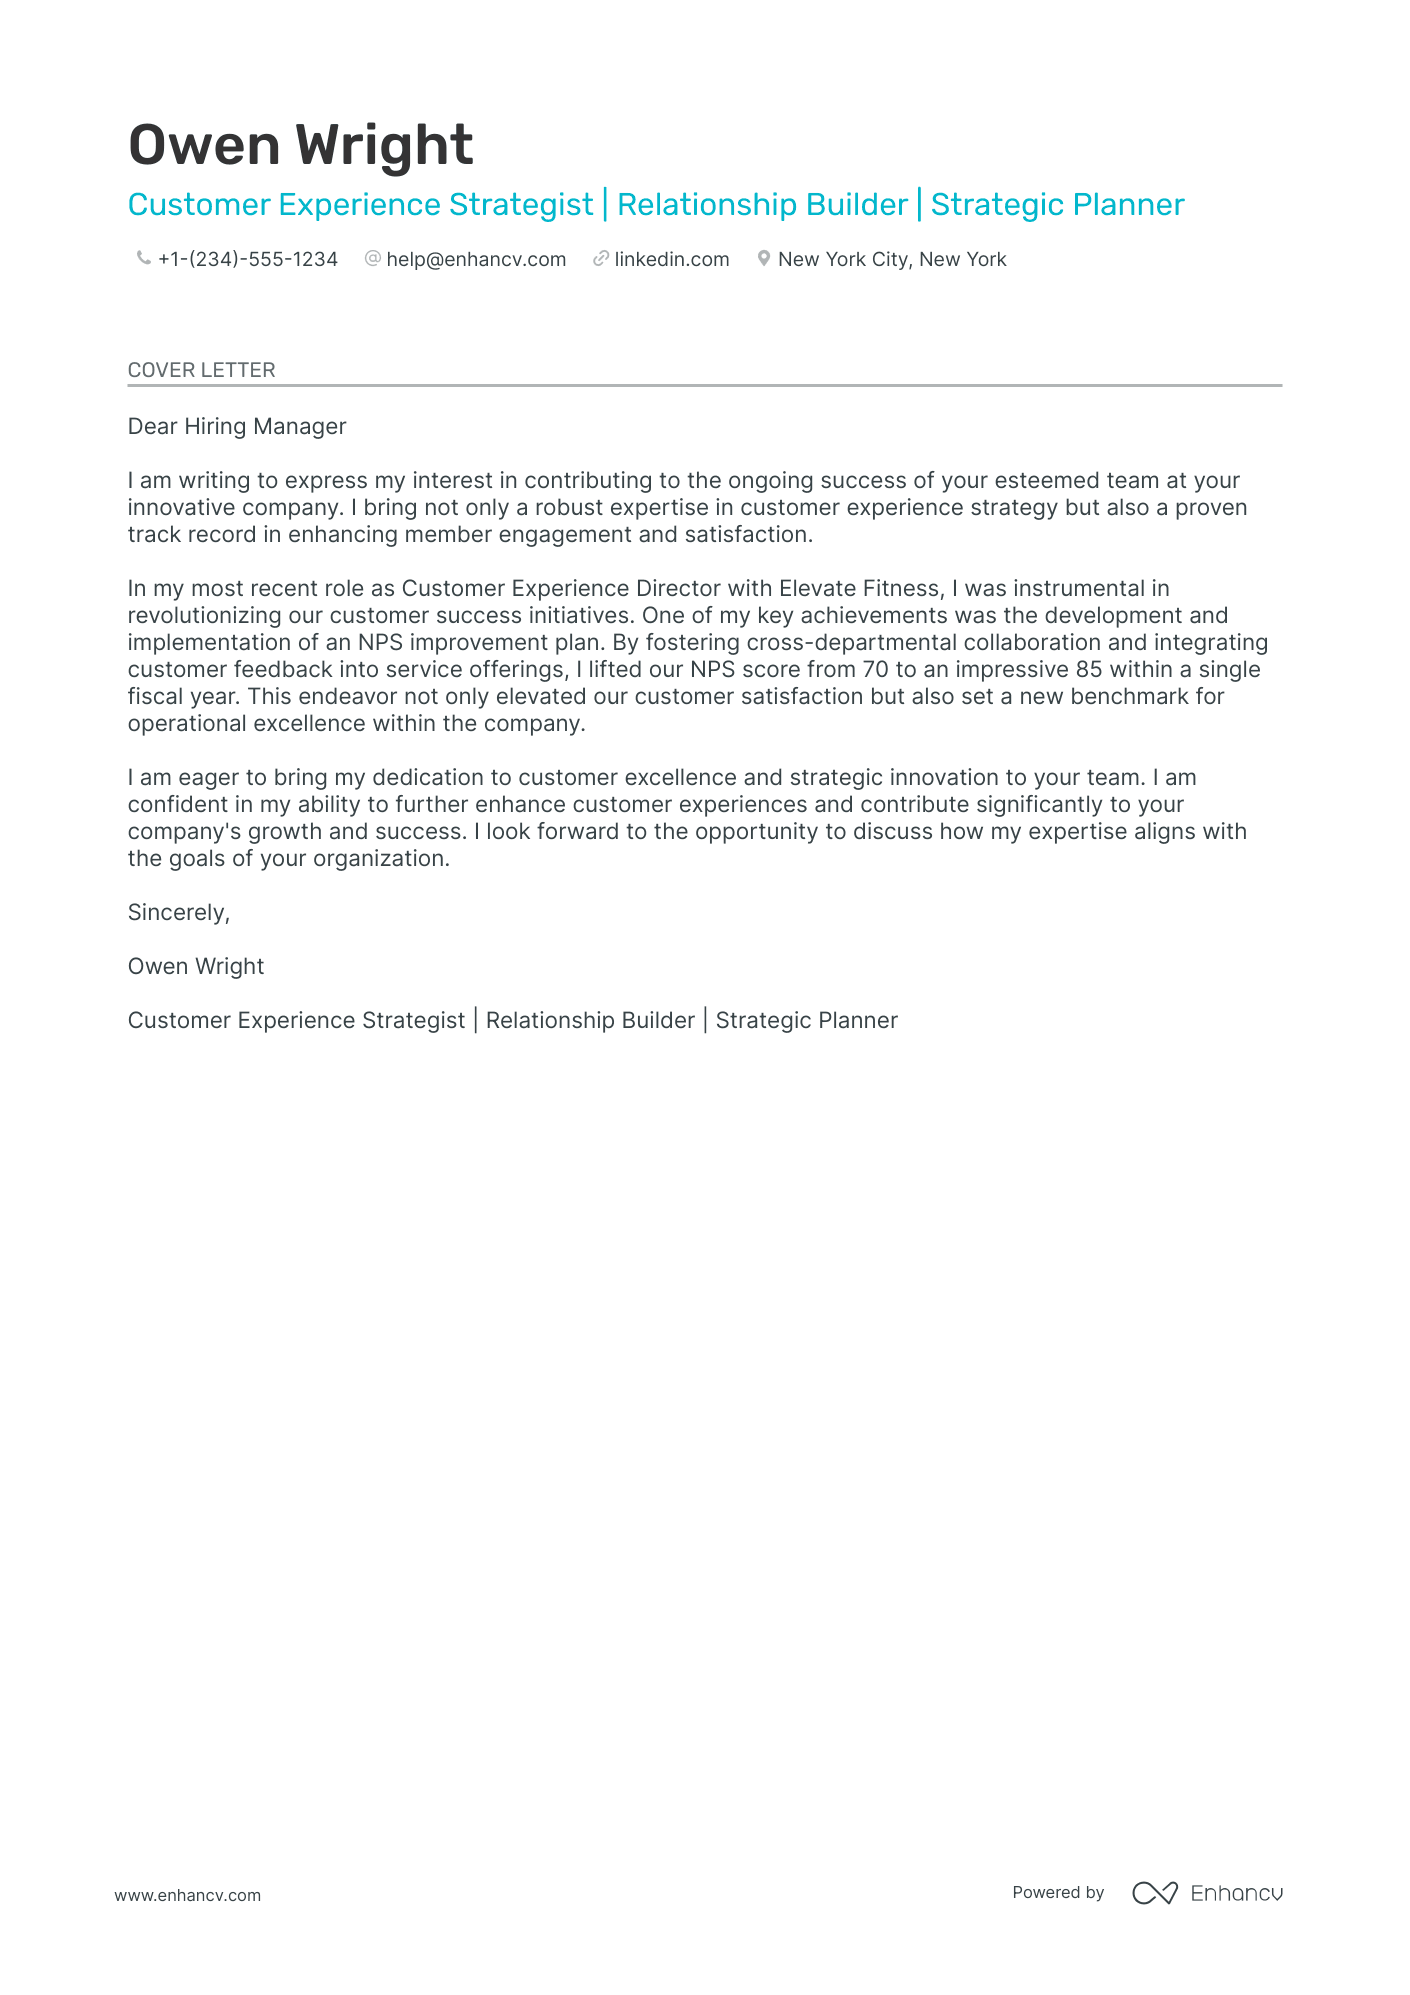 Hospitality Manager cover letter